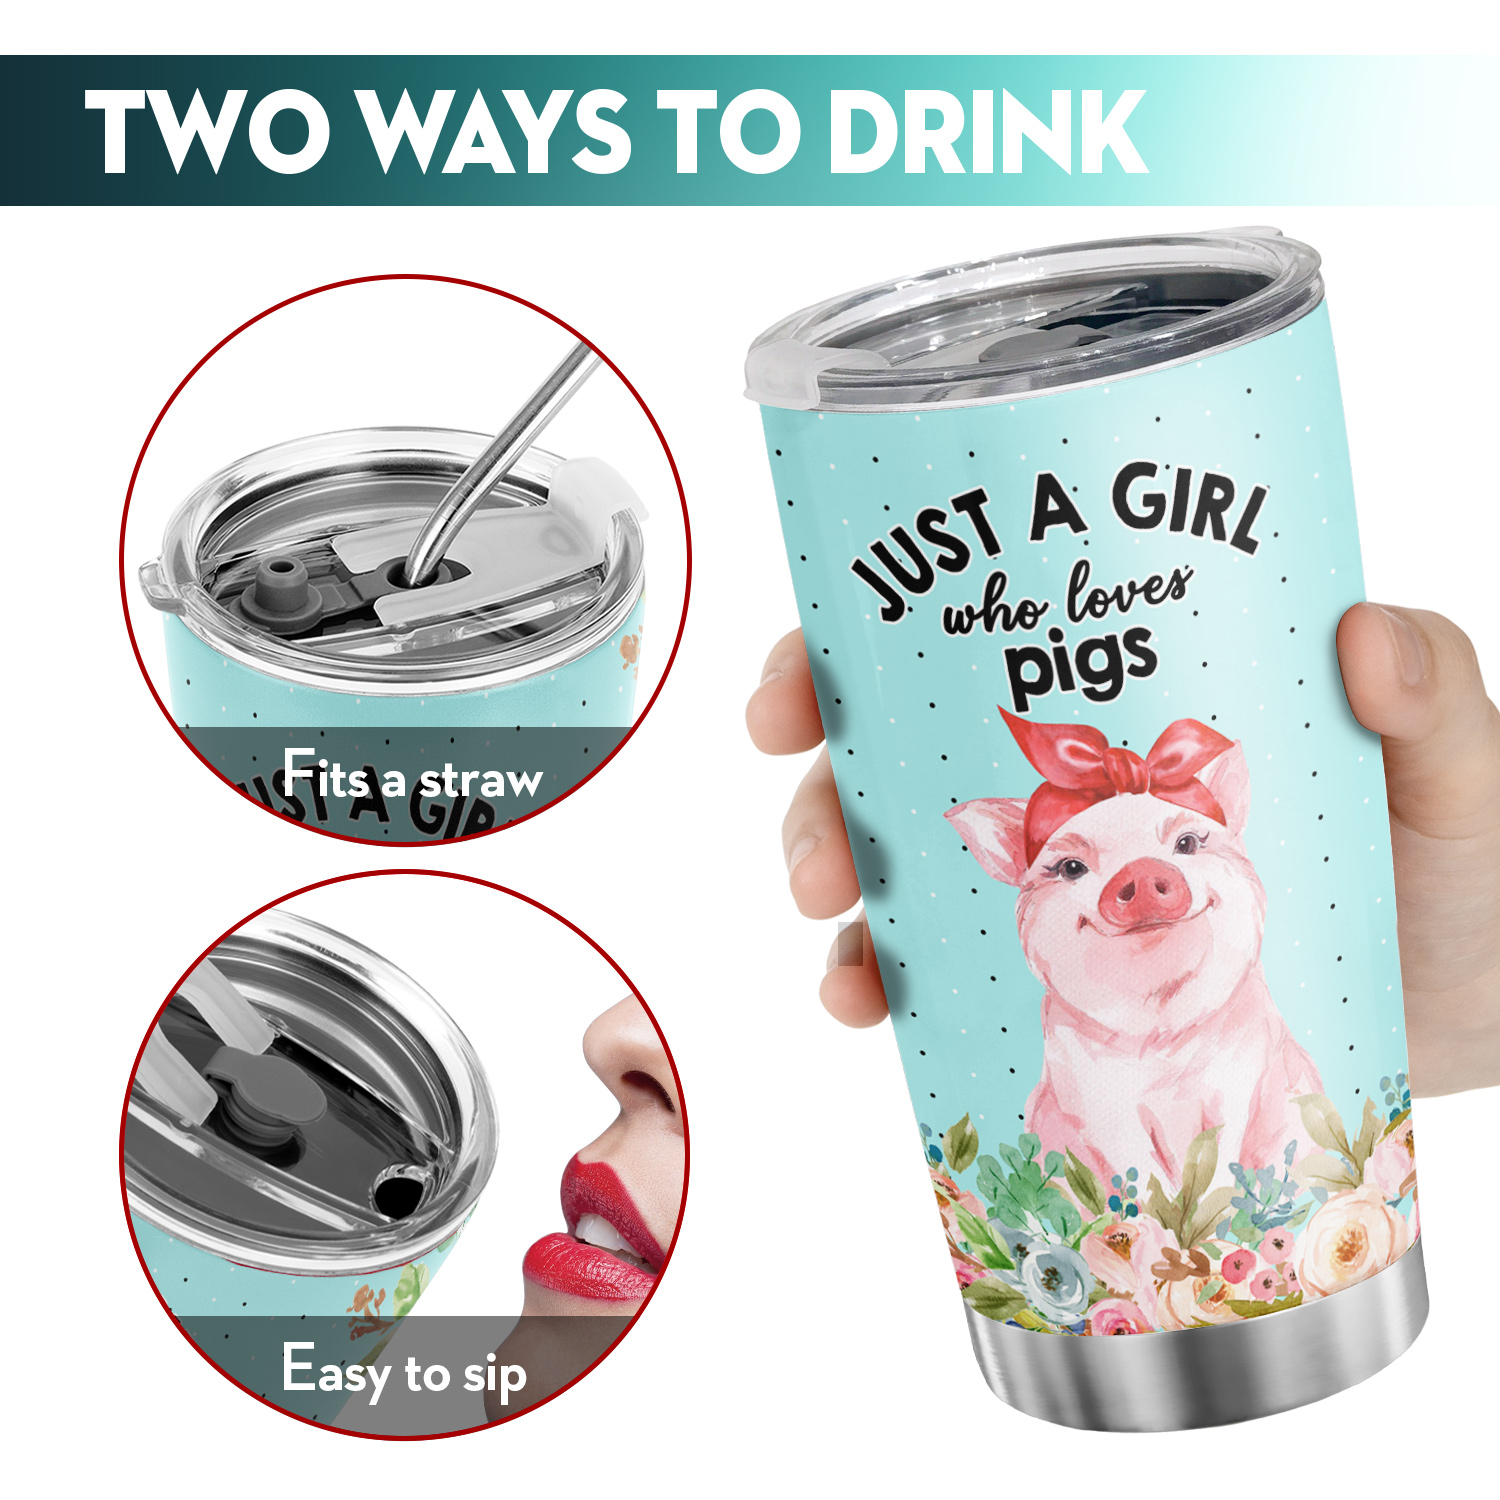 1pc Just A Girl Who Loves Books Stainless Steel Travel Tumbler 20 Oz With  Lid, Vacuum Insulated Coffee Cup For Cold & Hot Drinks